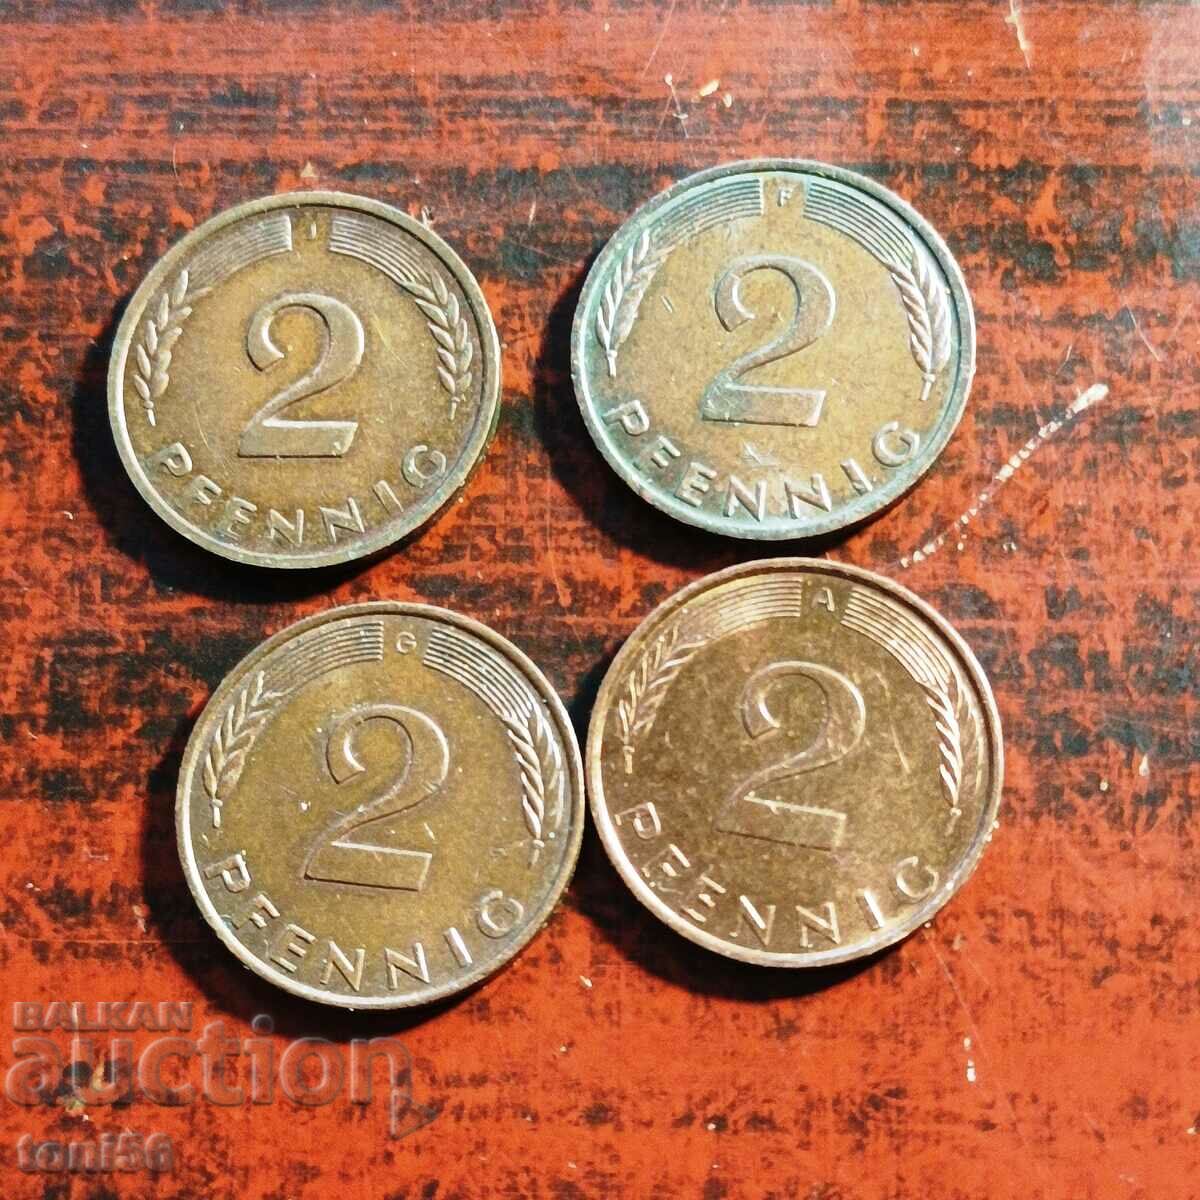 Germany - GDR, 4x2 pfennig different years and mon. yards